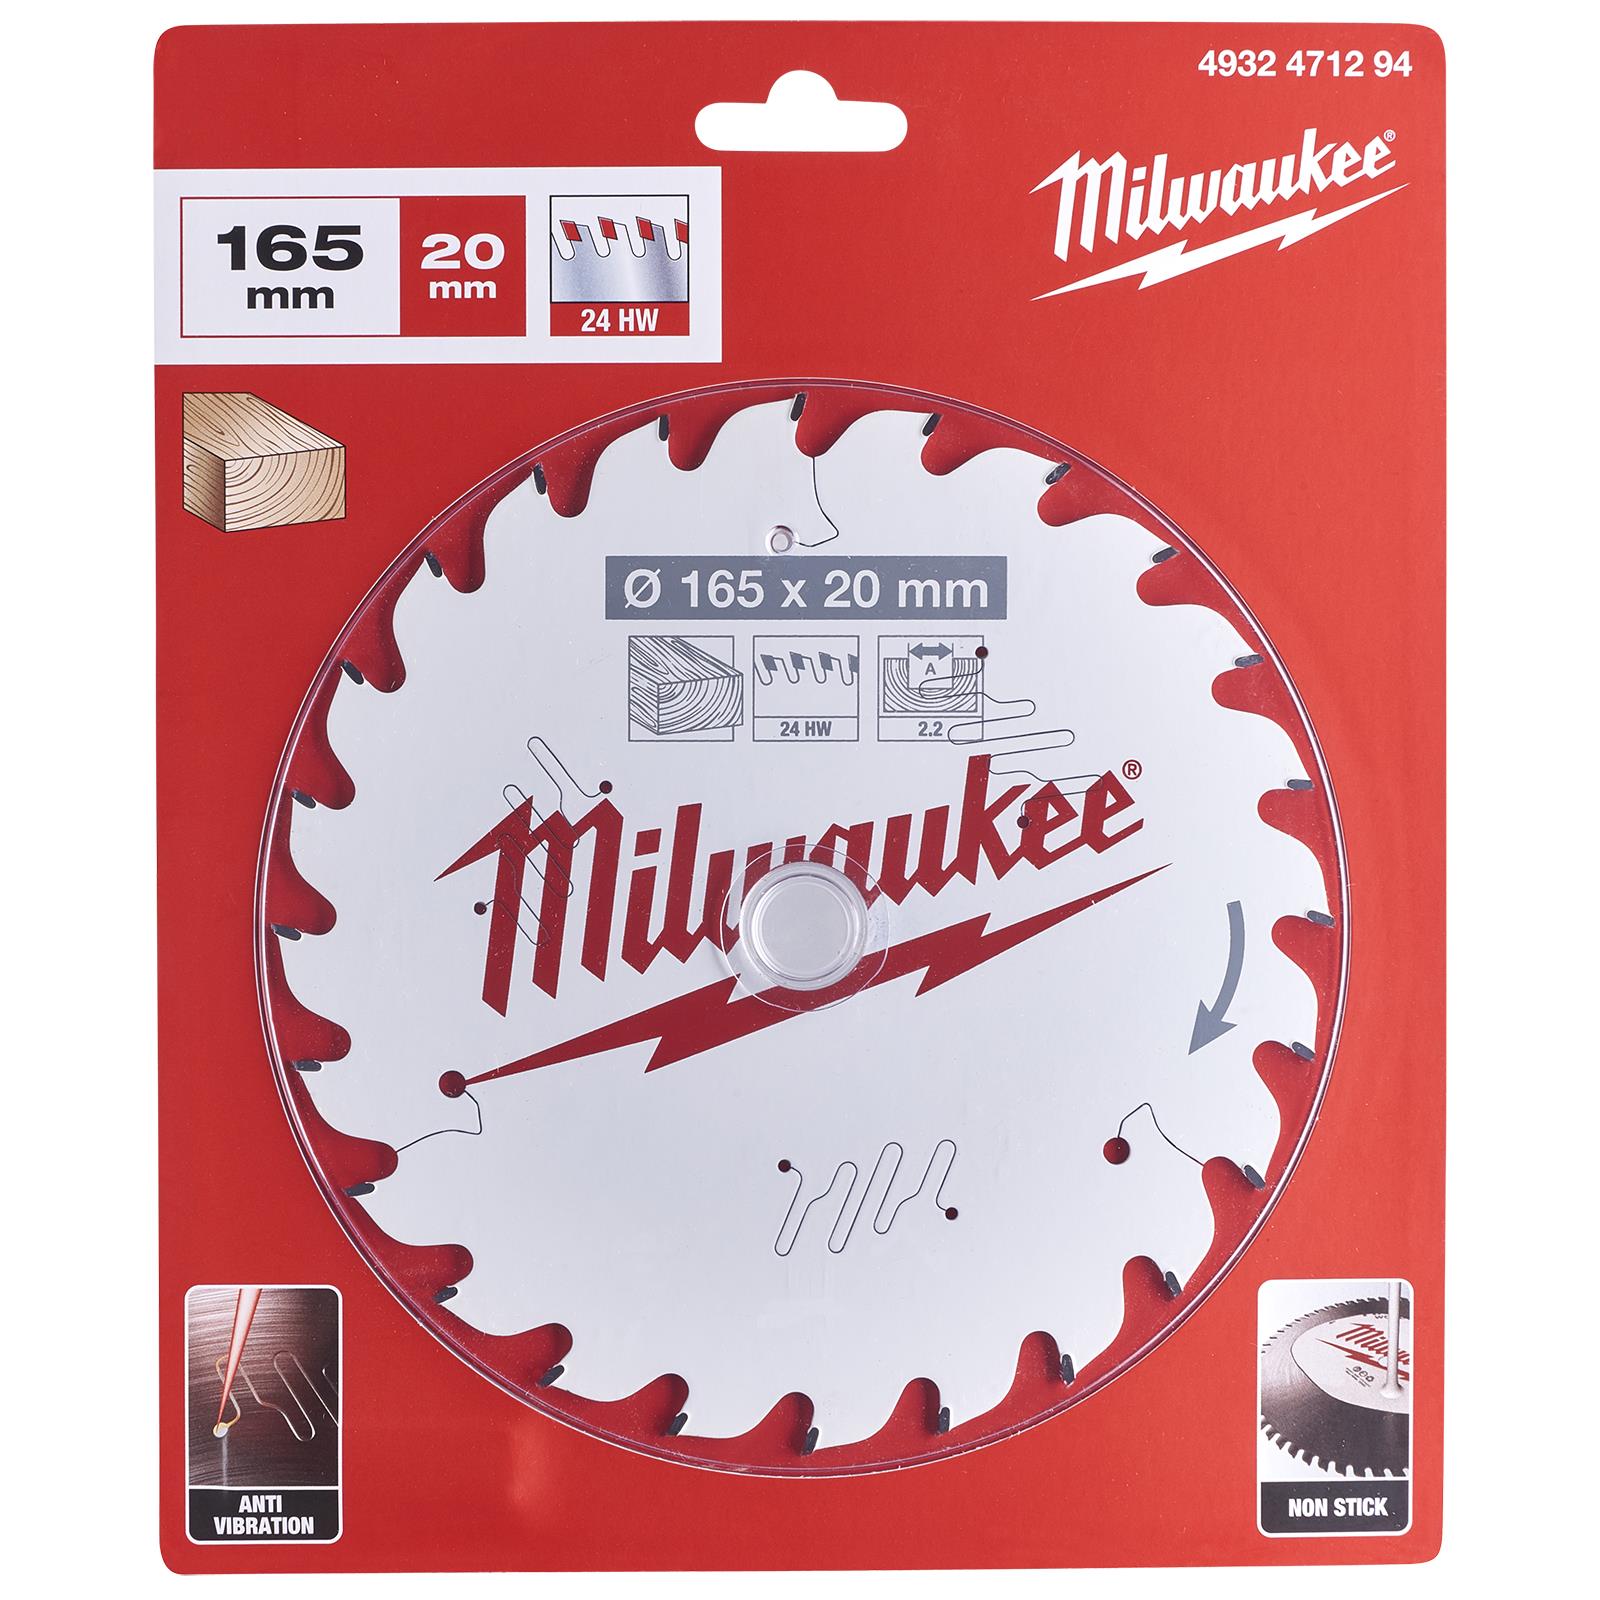 Milwaukee Circular Saw Blade for Wood 165mm x 20mm Bore x 2.2mm Width 24T ATB